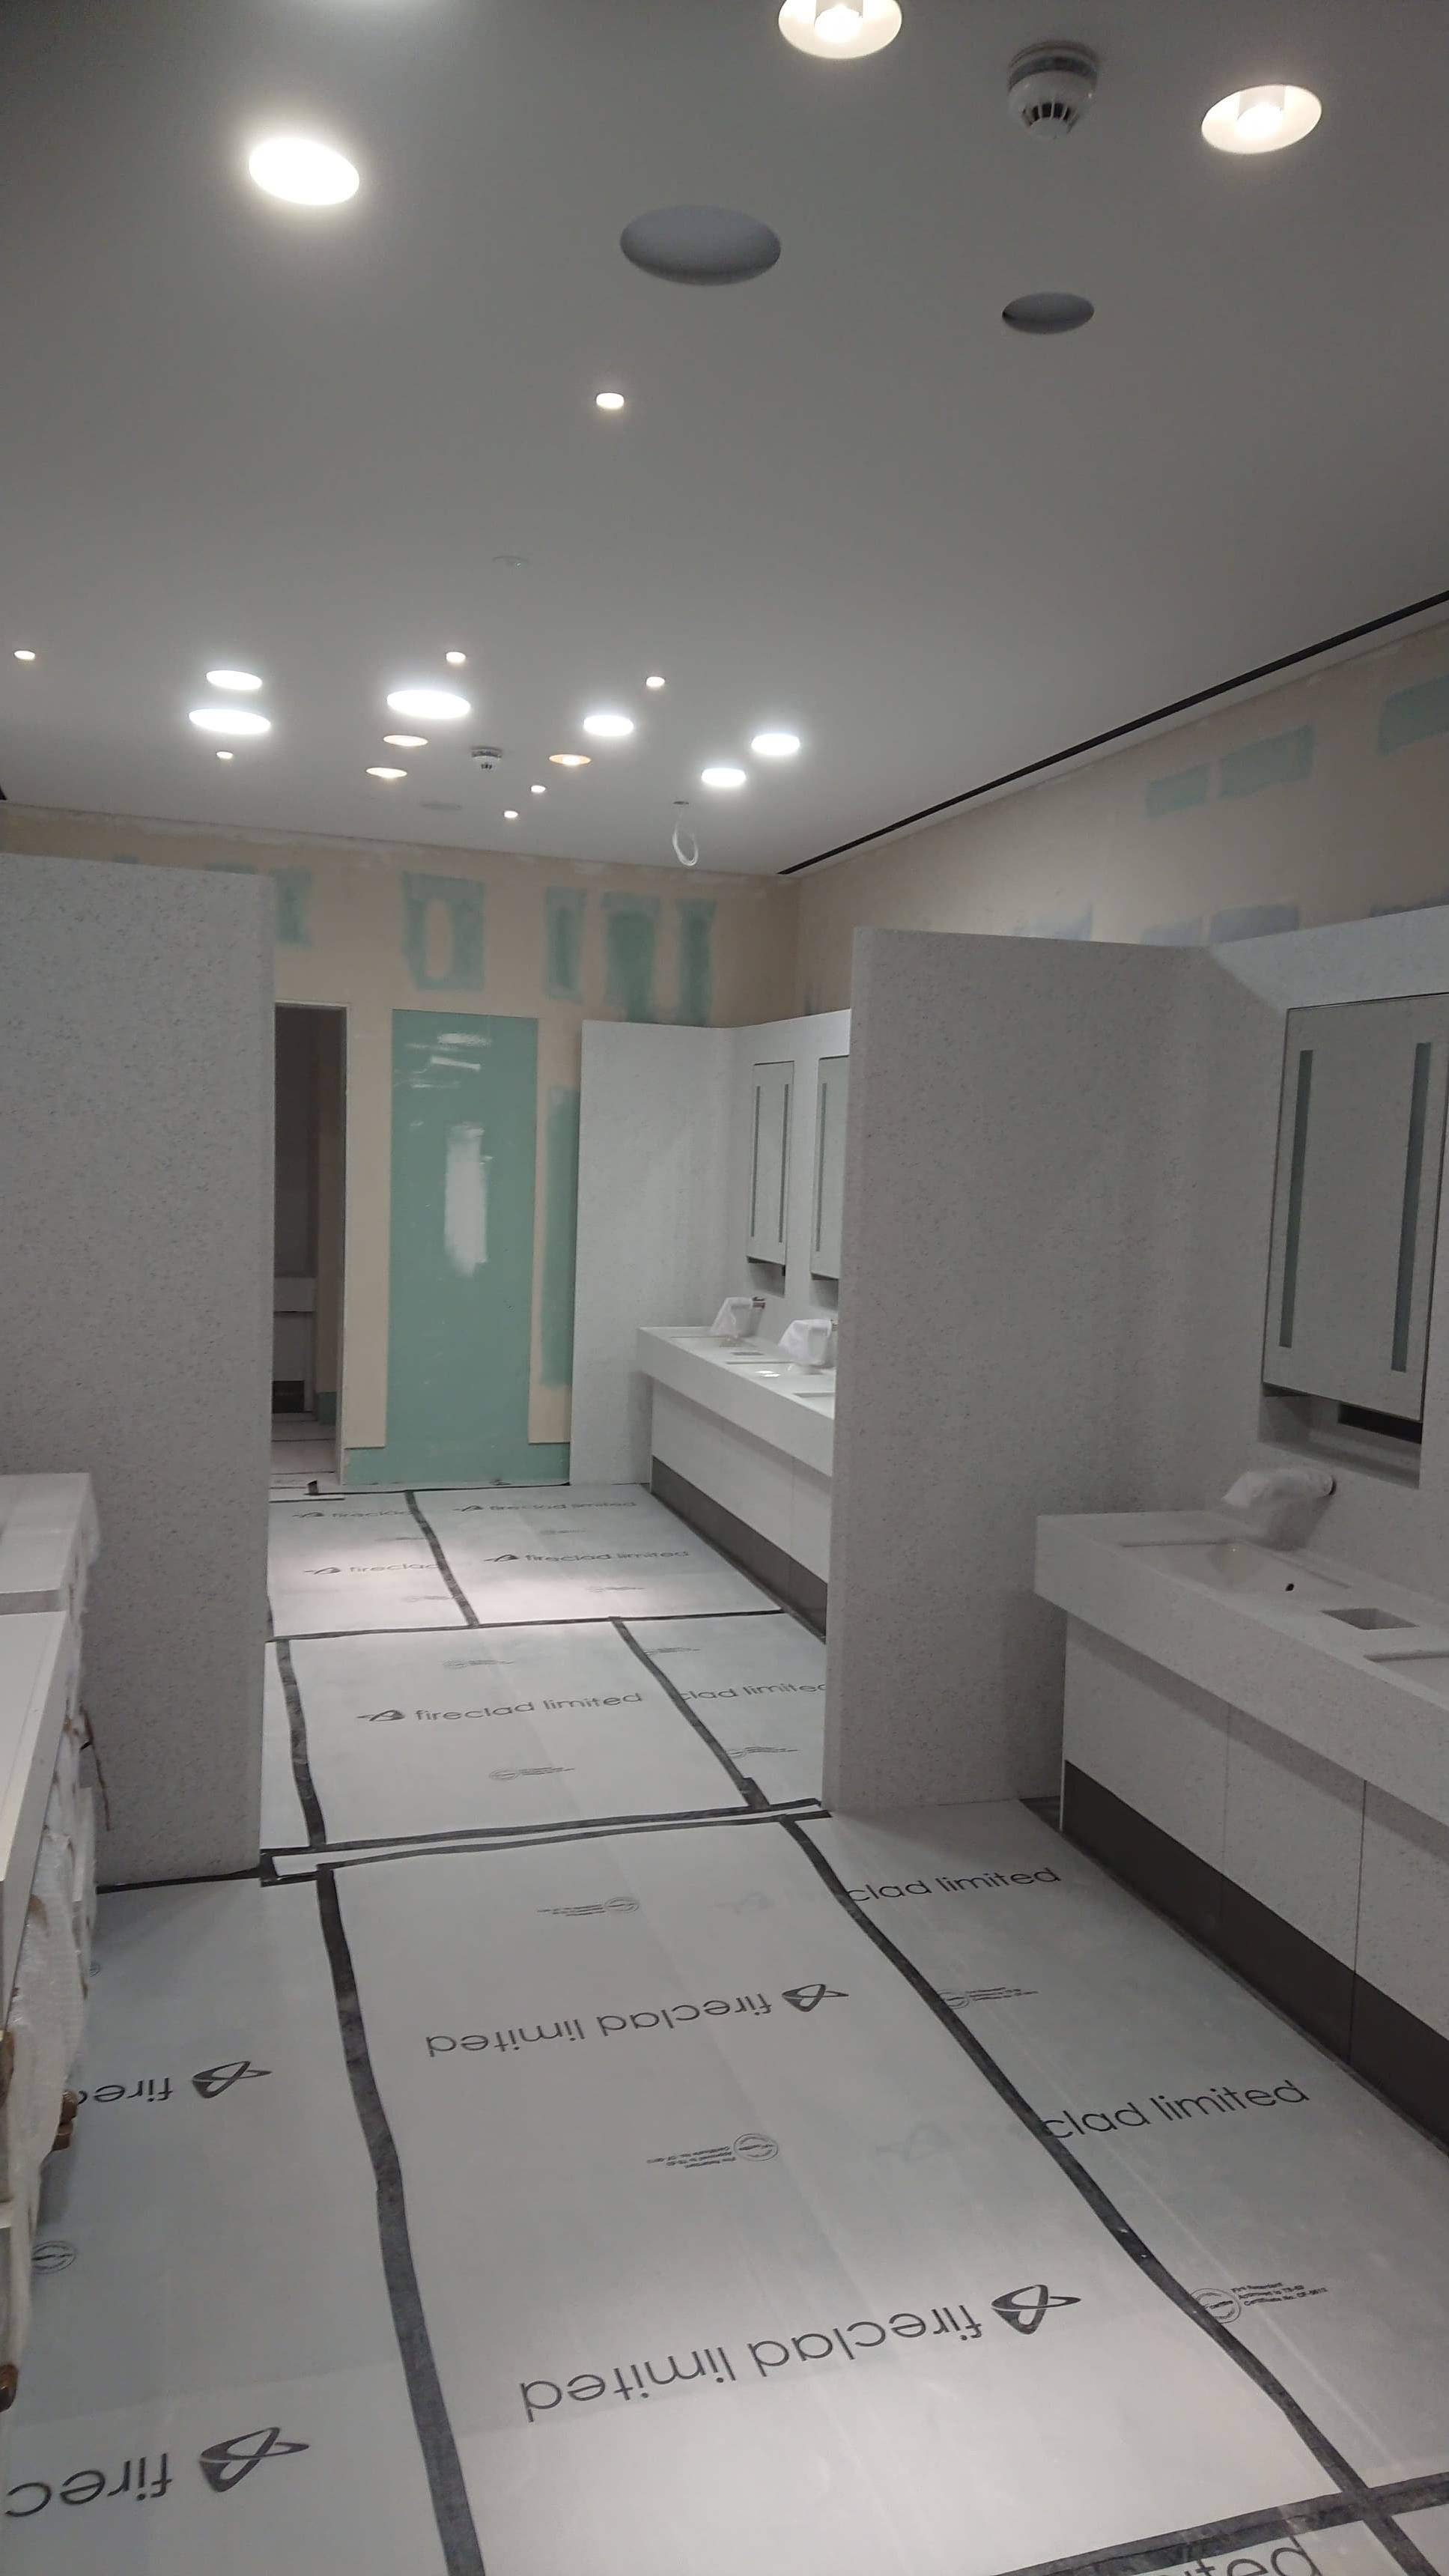 Plumtree Court, Shoe Lane, Central London, EC4 - Skilled Corian fitters 12